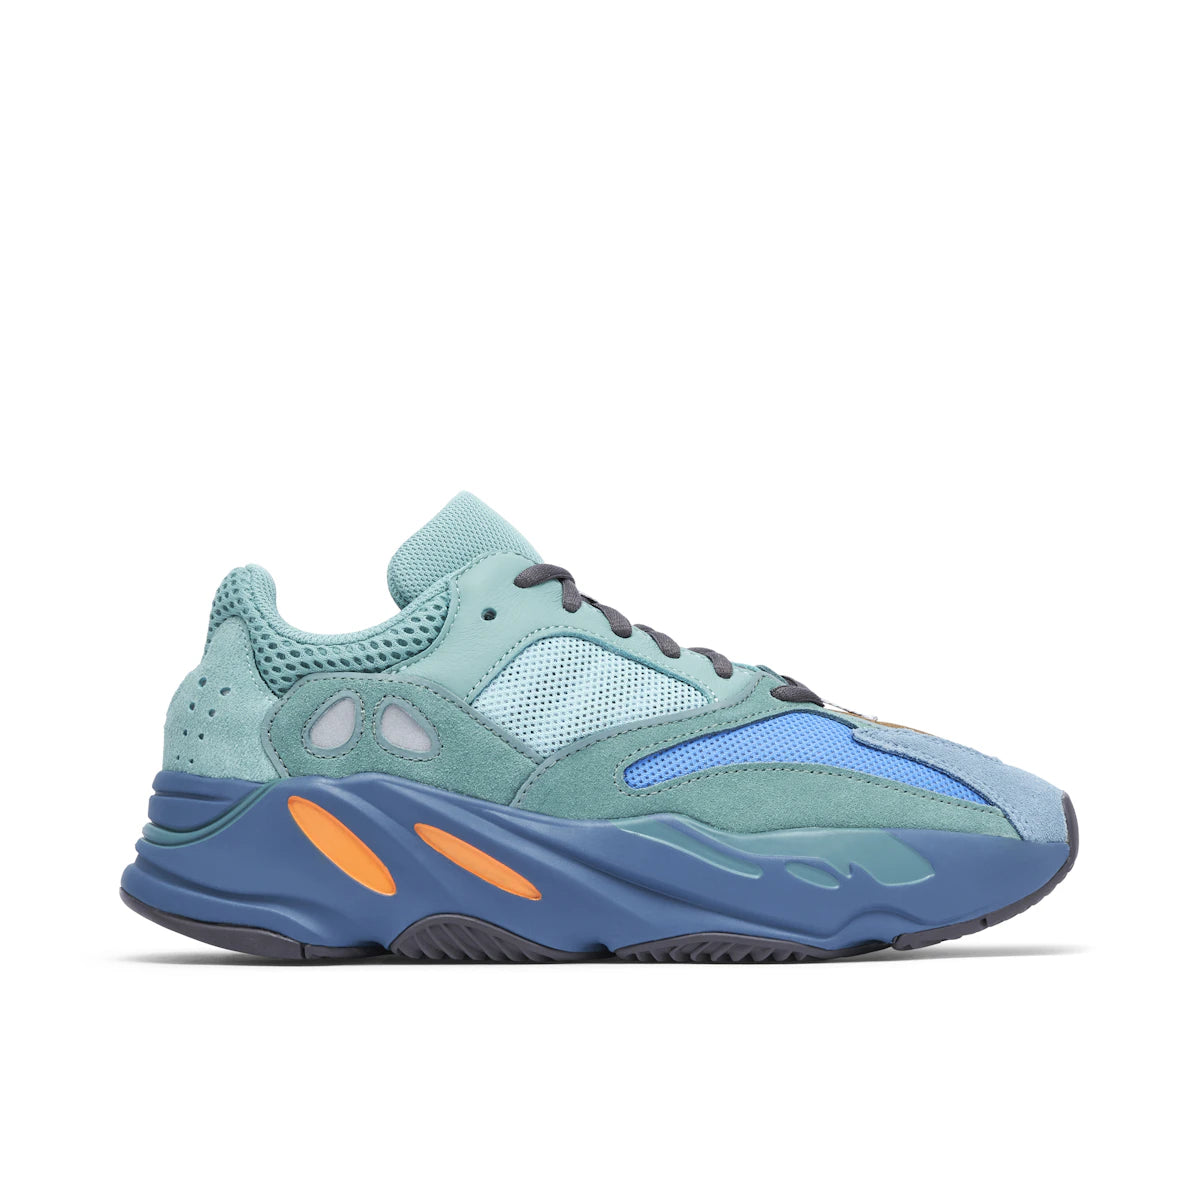 Adidias Yeezy Boost 700 Faded Azure by Yeezy from £300.00